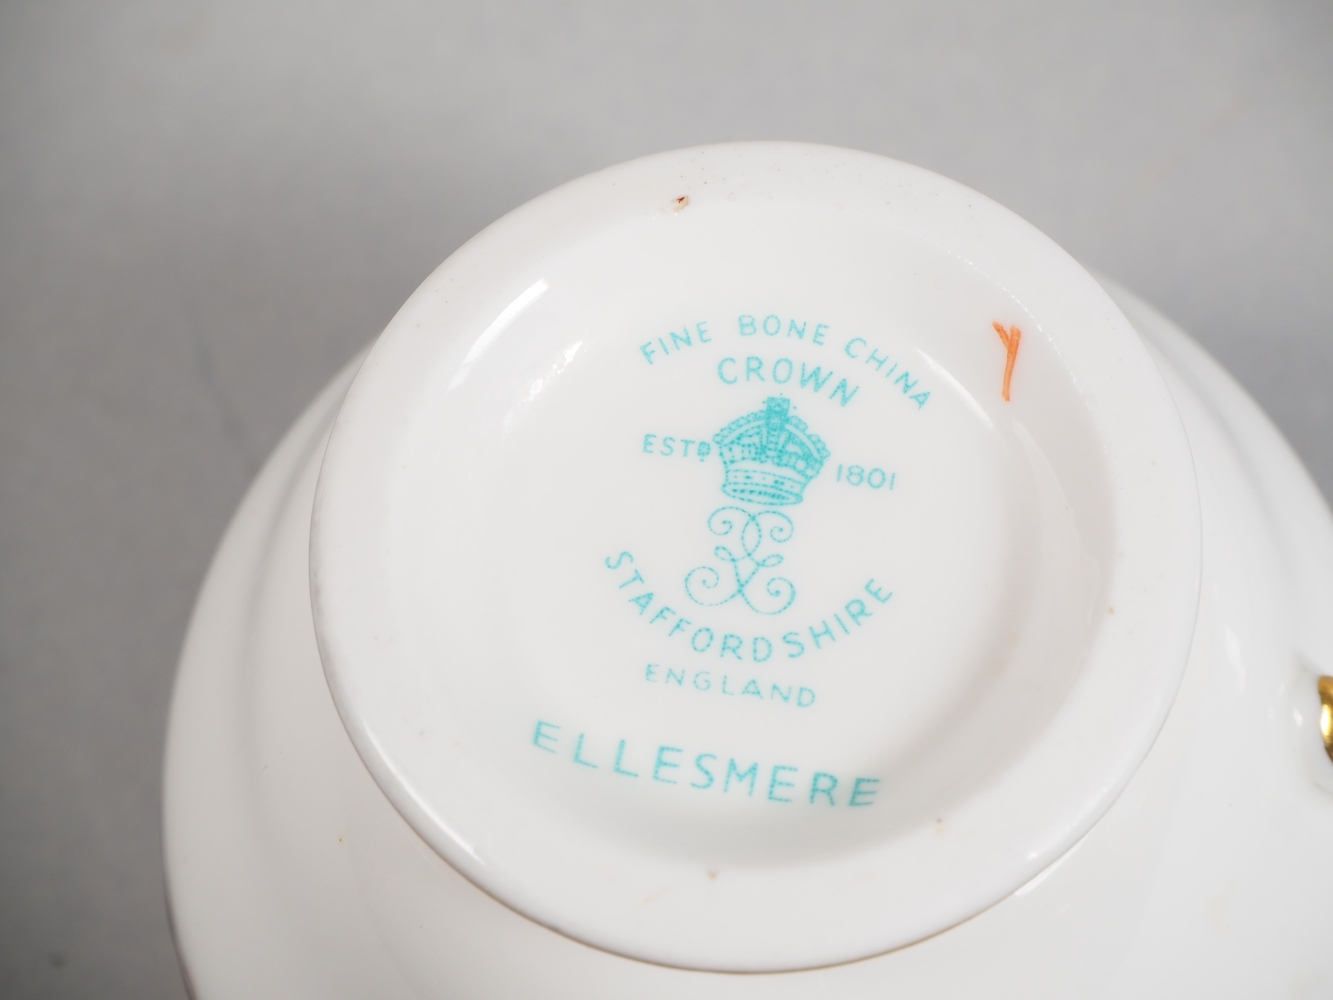 Coffee service Staffordshire Ellesmere for 6 persons, 21 pieces. - Image 5 of 6